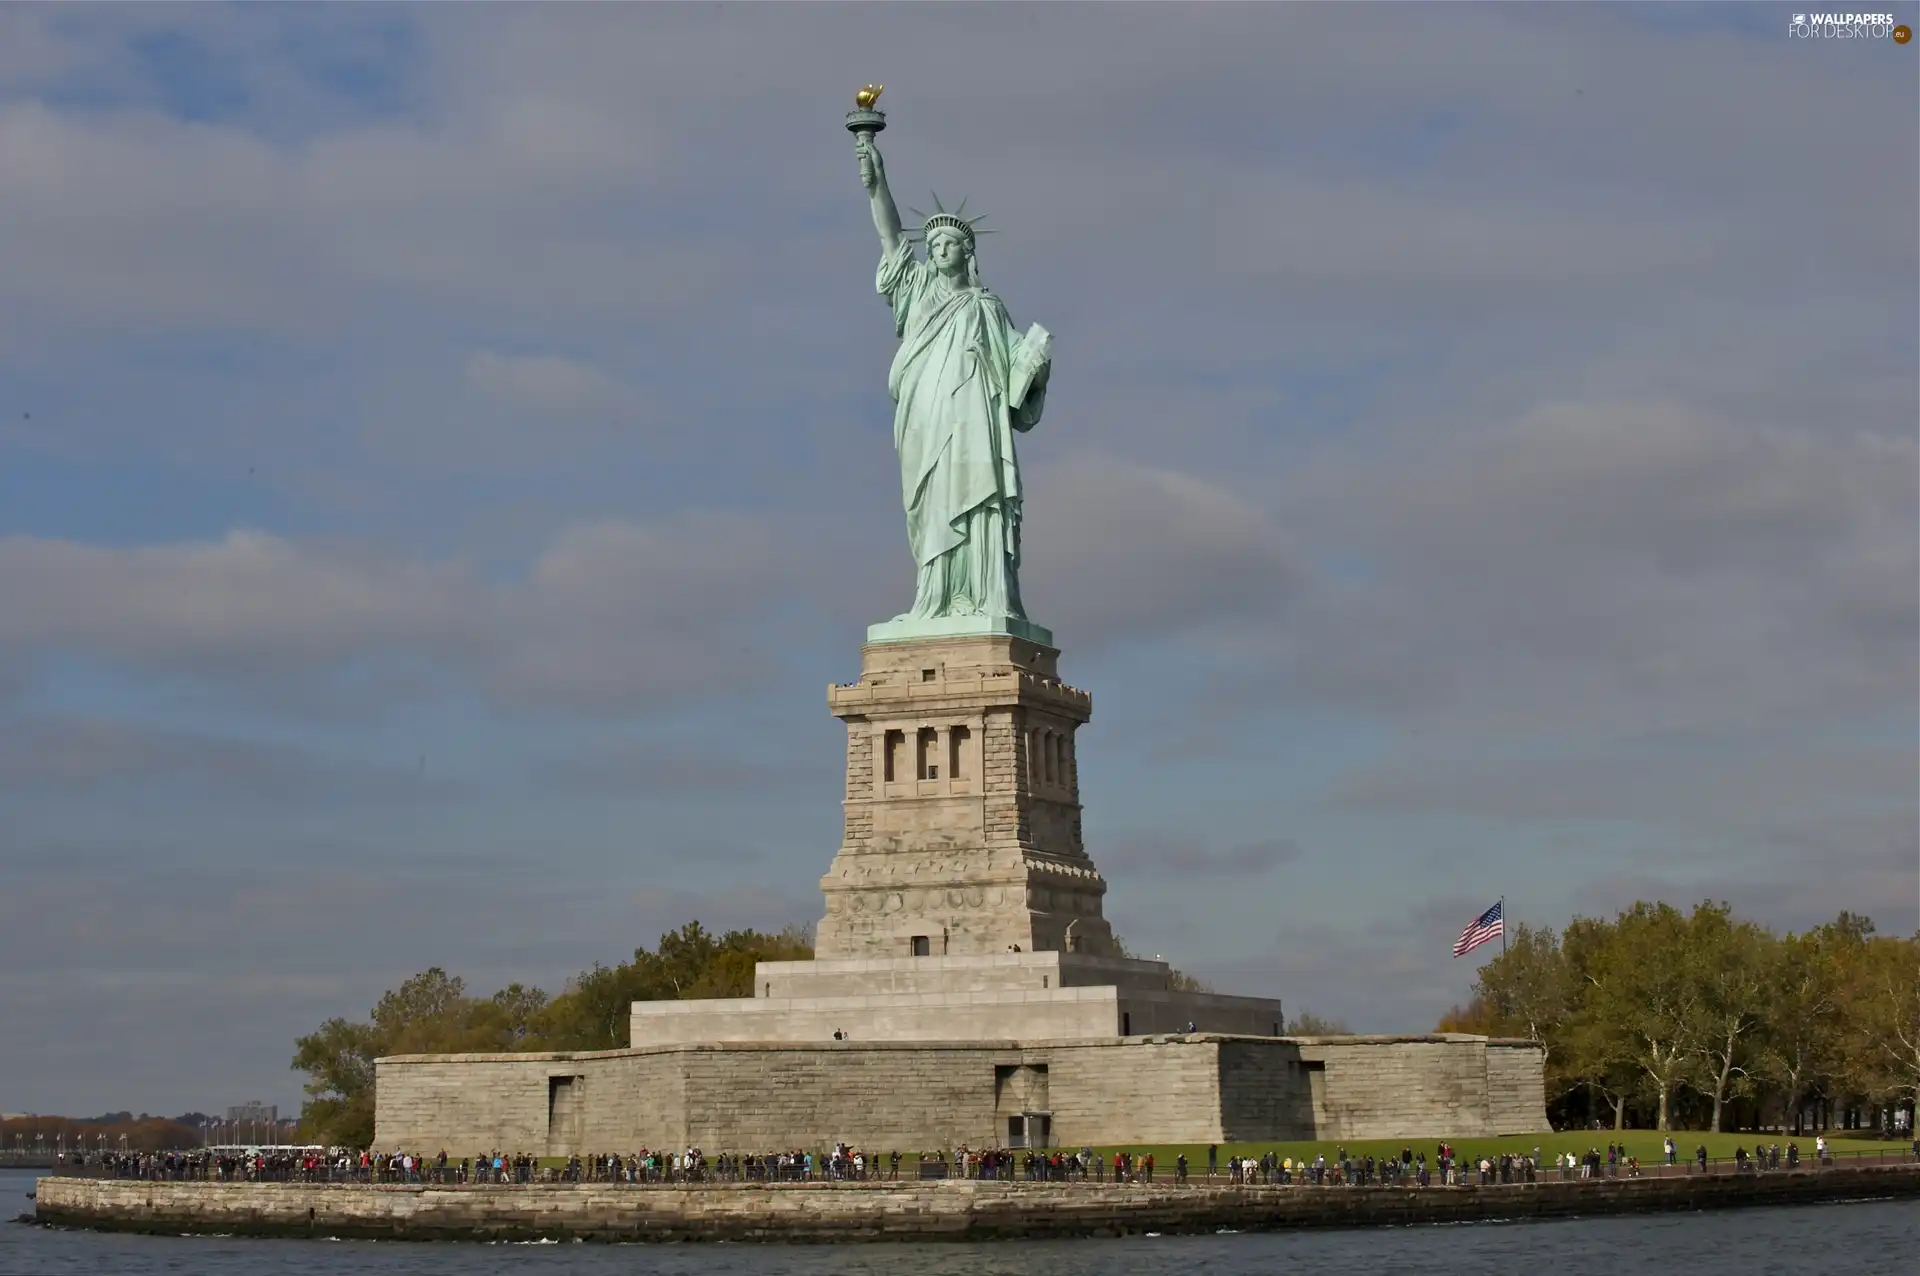 New York, Statue of Liberty, The United States